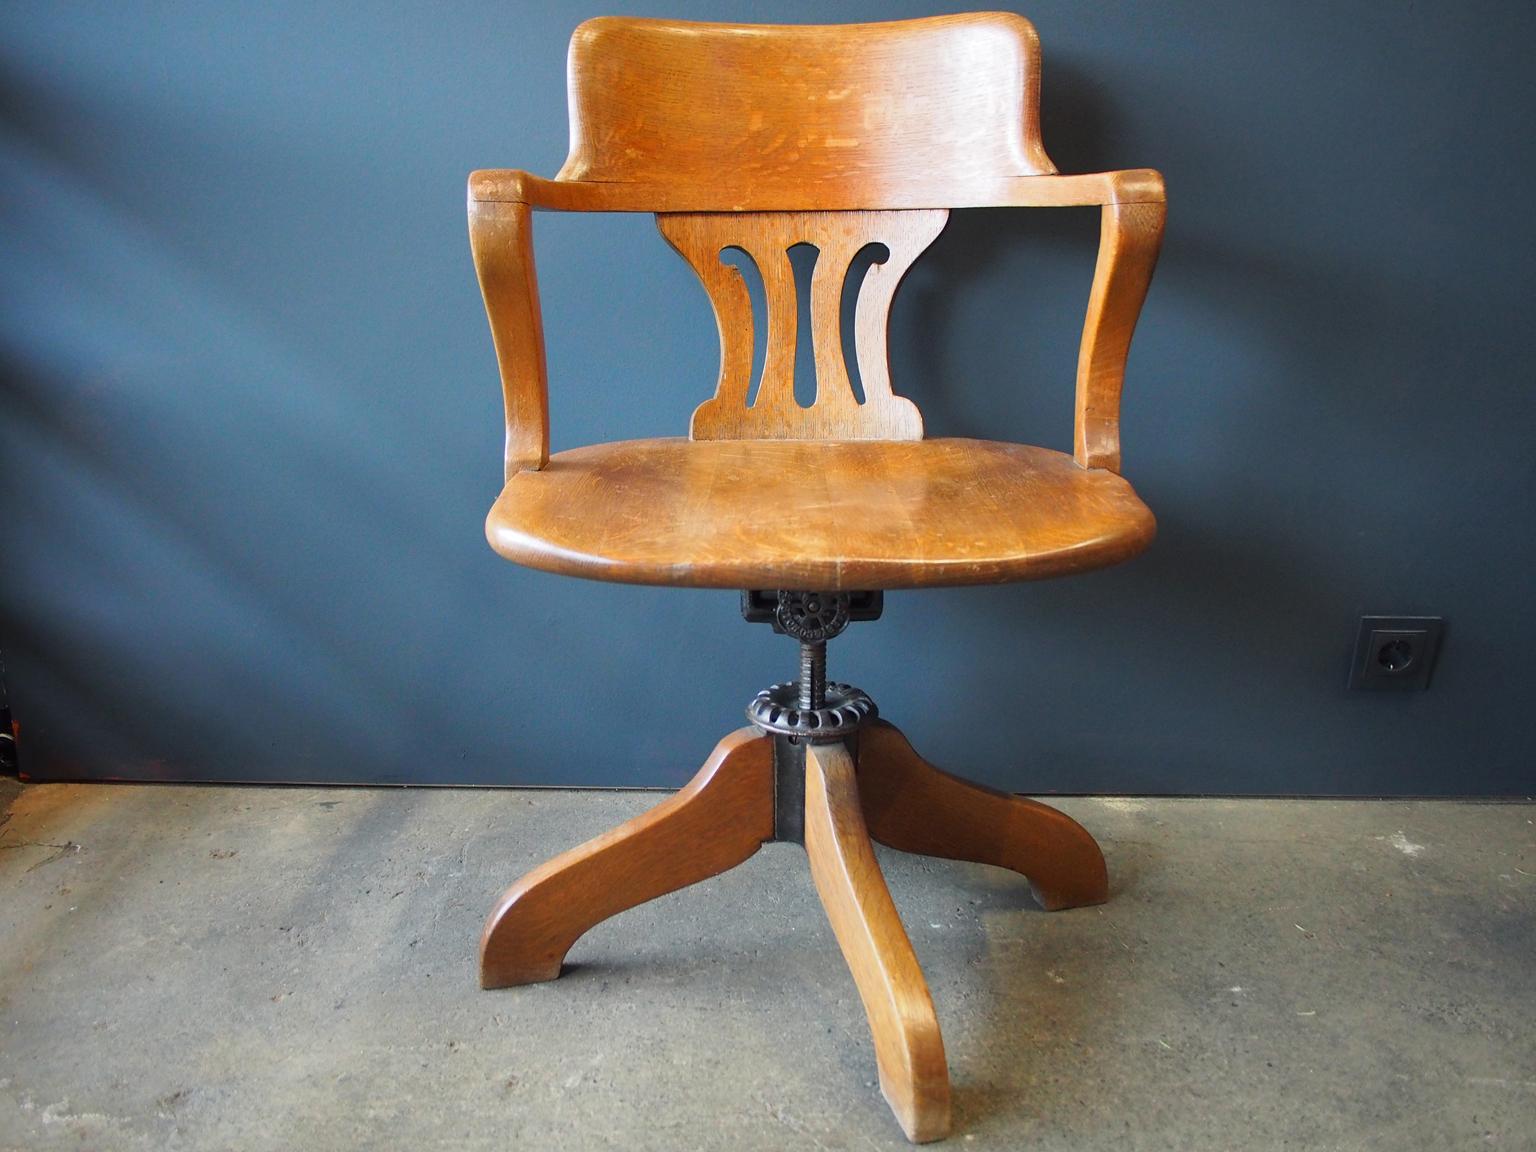 Beautiful office chair from the early 20th century. The armchair is height adjustable, swiveling and has a flexible backrest. Especially nice is the Art Deco shape in combination with the industrial screws.